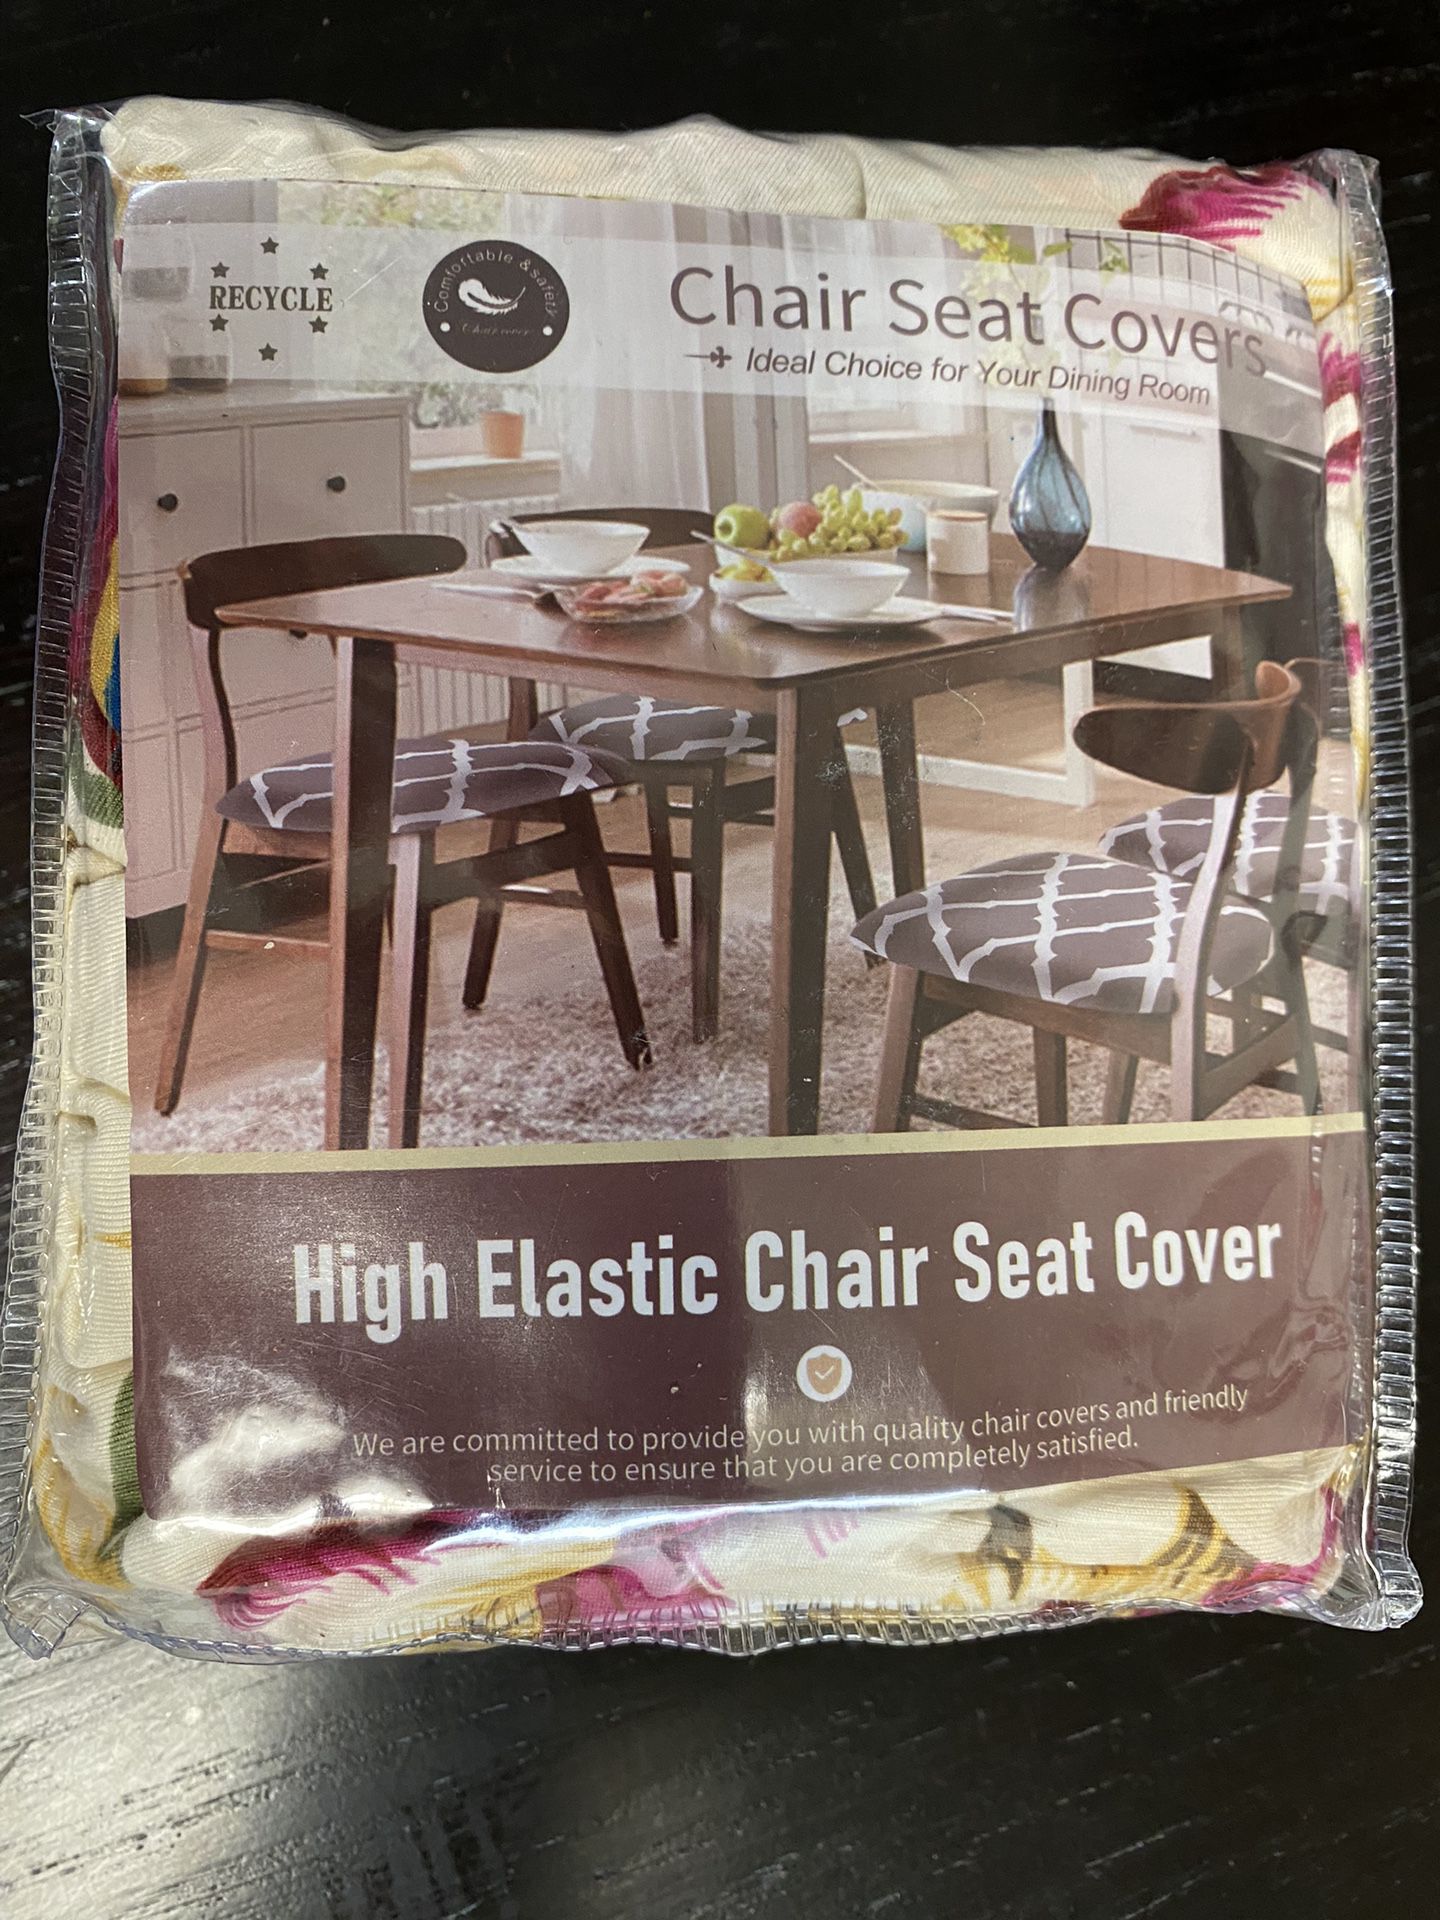 Covers For Chairs And Bottom Leg Plastics Chairs